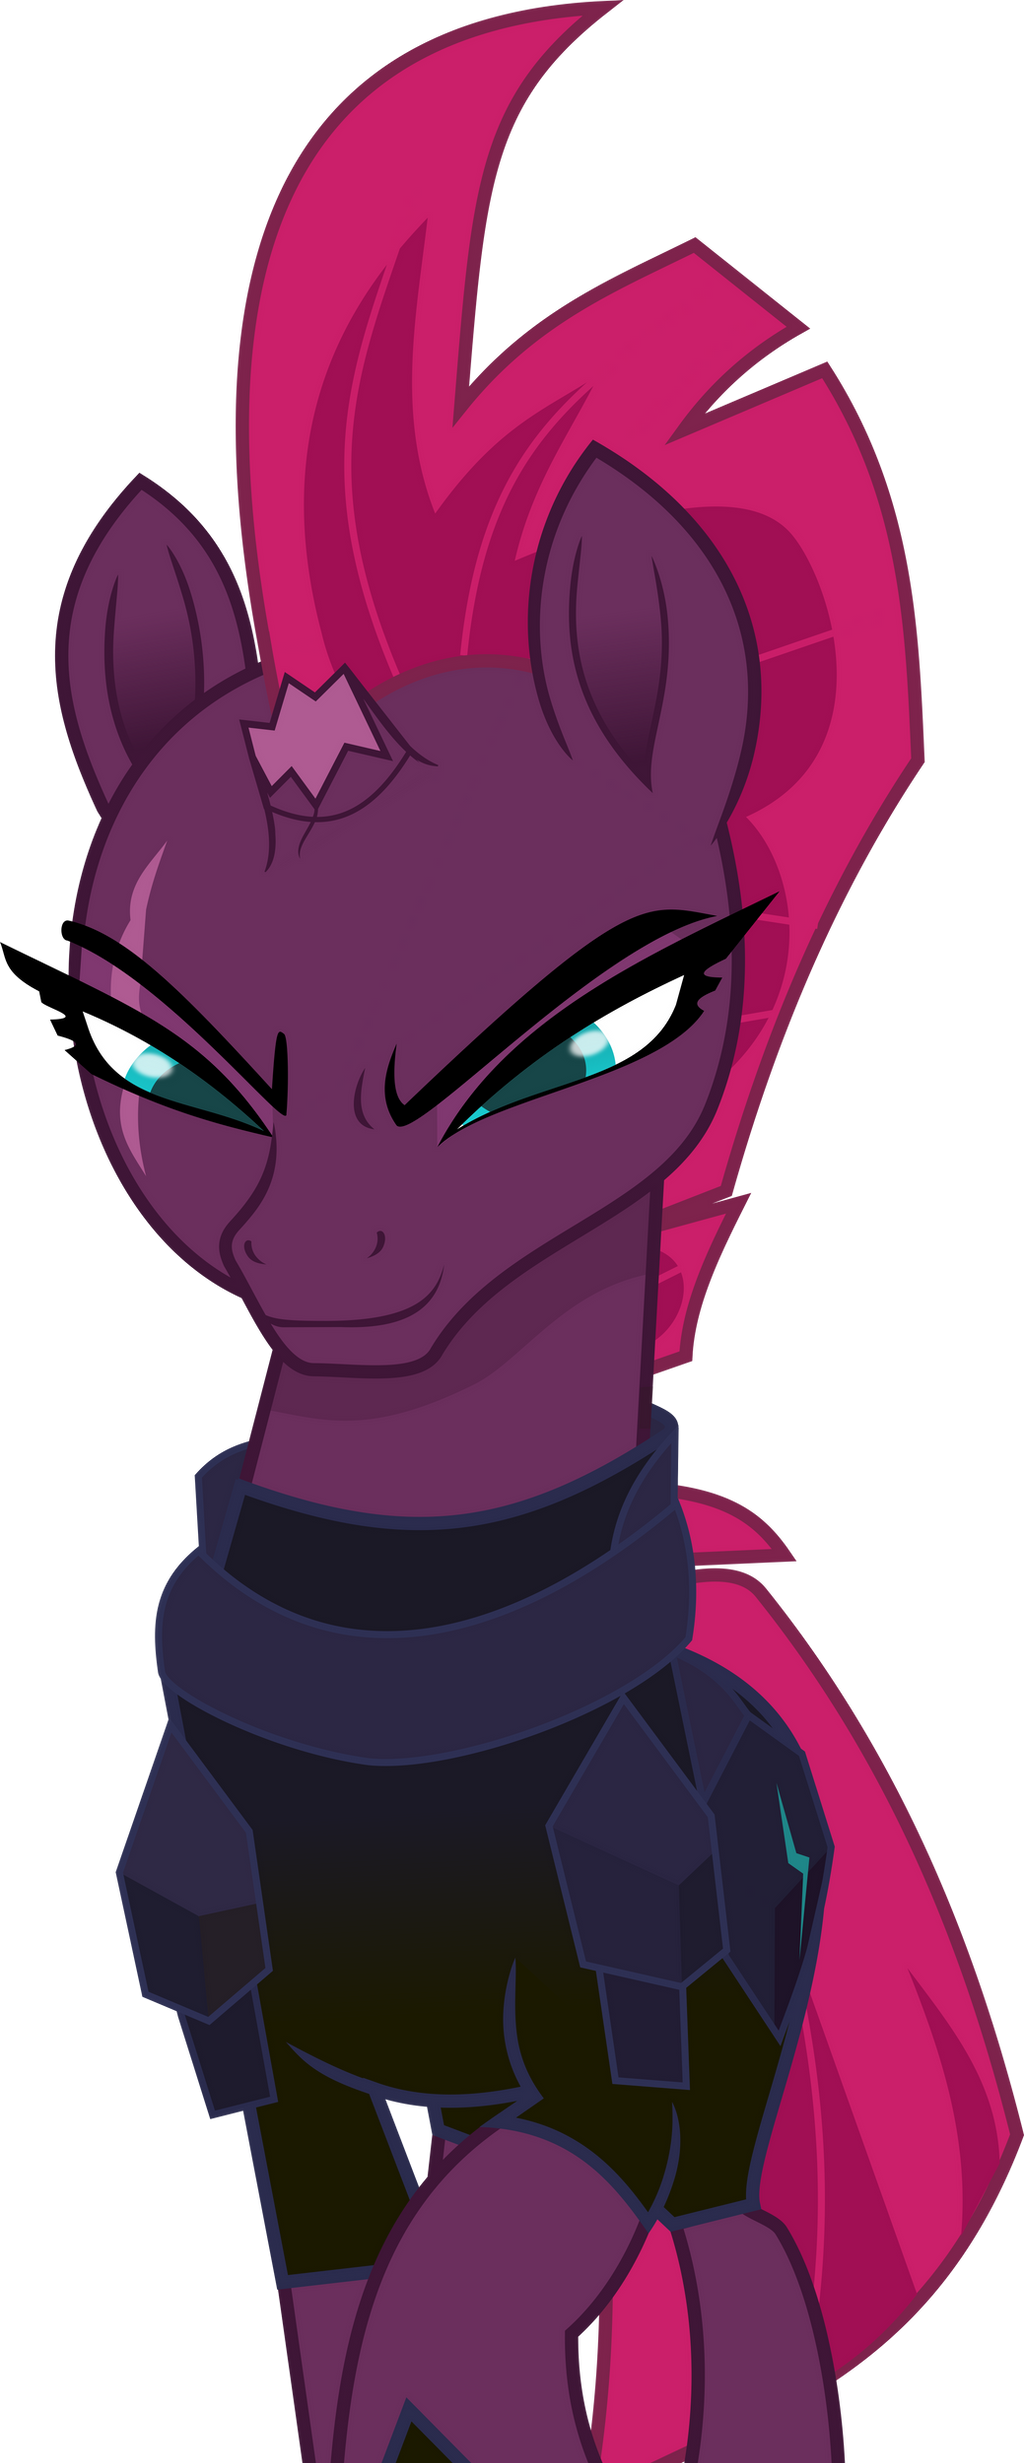 https://img00.deviantart.net/d26f/i/2017/213/a/3/mlp_movie__tempest_shadow_by_jhayarr23-dbig73y.png